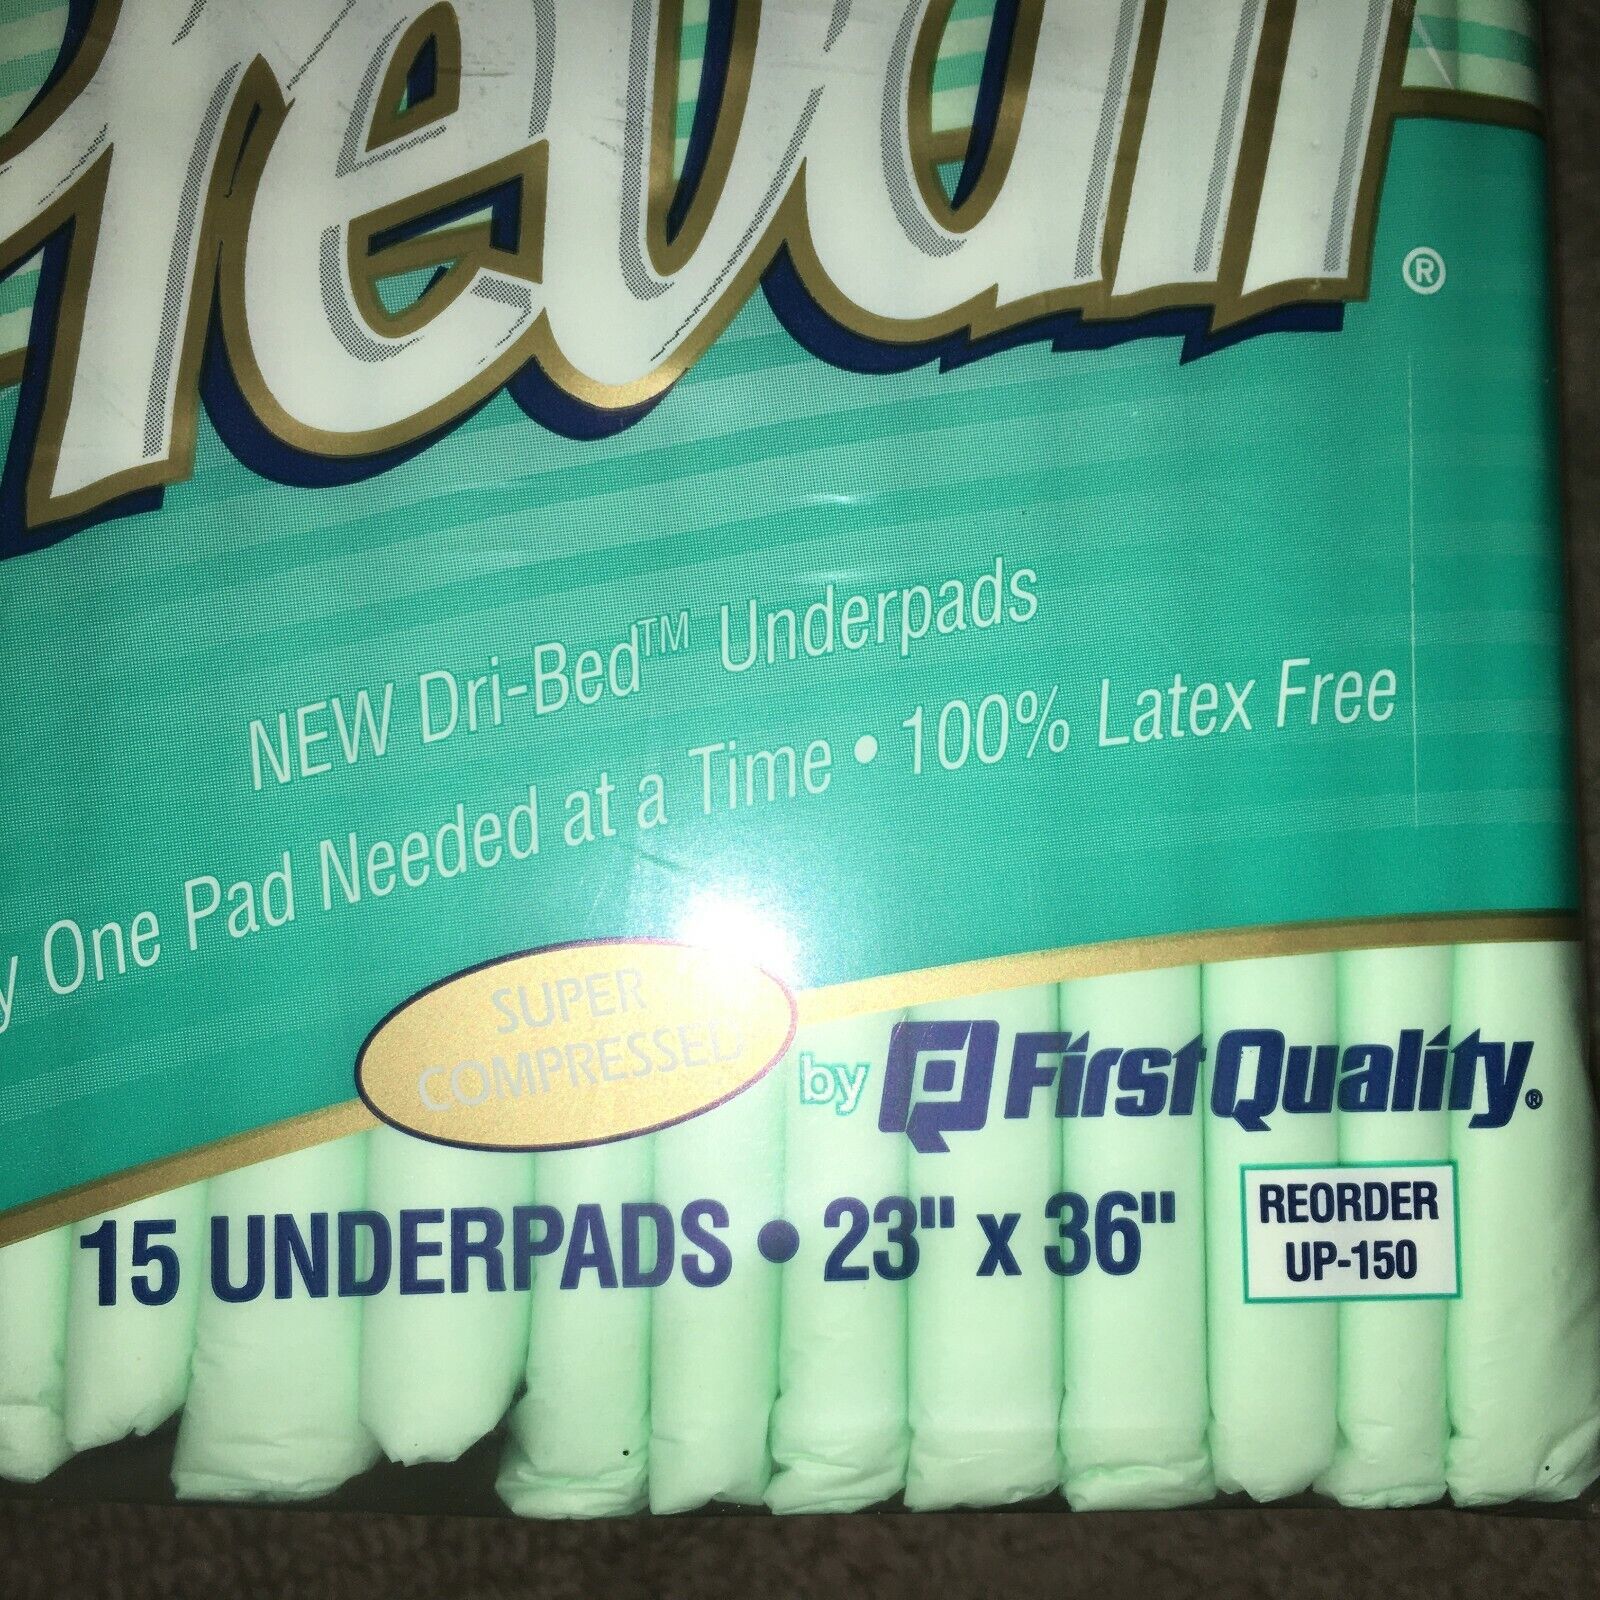 New Lot of 4 Large Prevail Fluff Dri-Bed Underpads 15ct  23x 36 Super Compressed Prevail - фотография #2